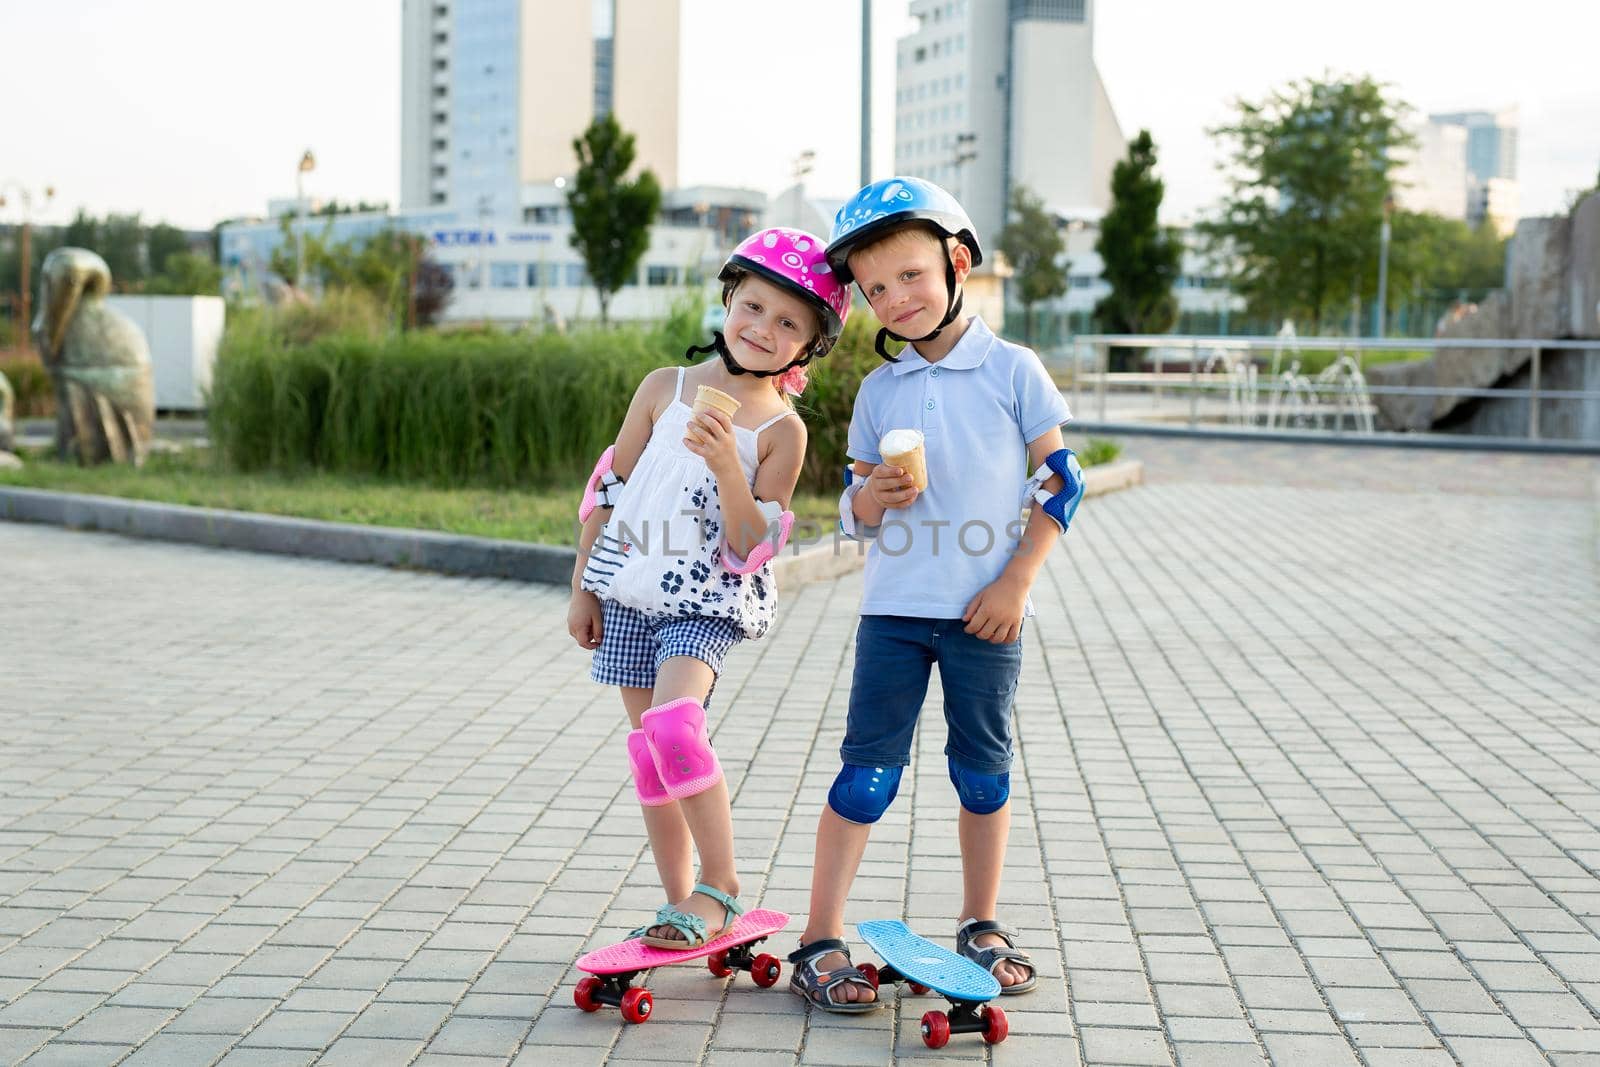 Portrait of children in the park with skates, they eat ice cream